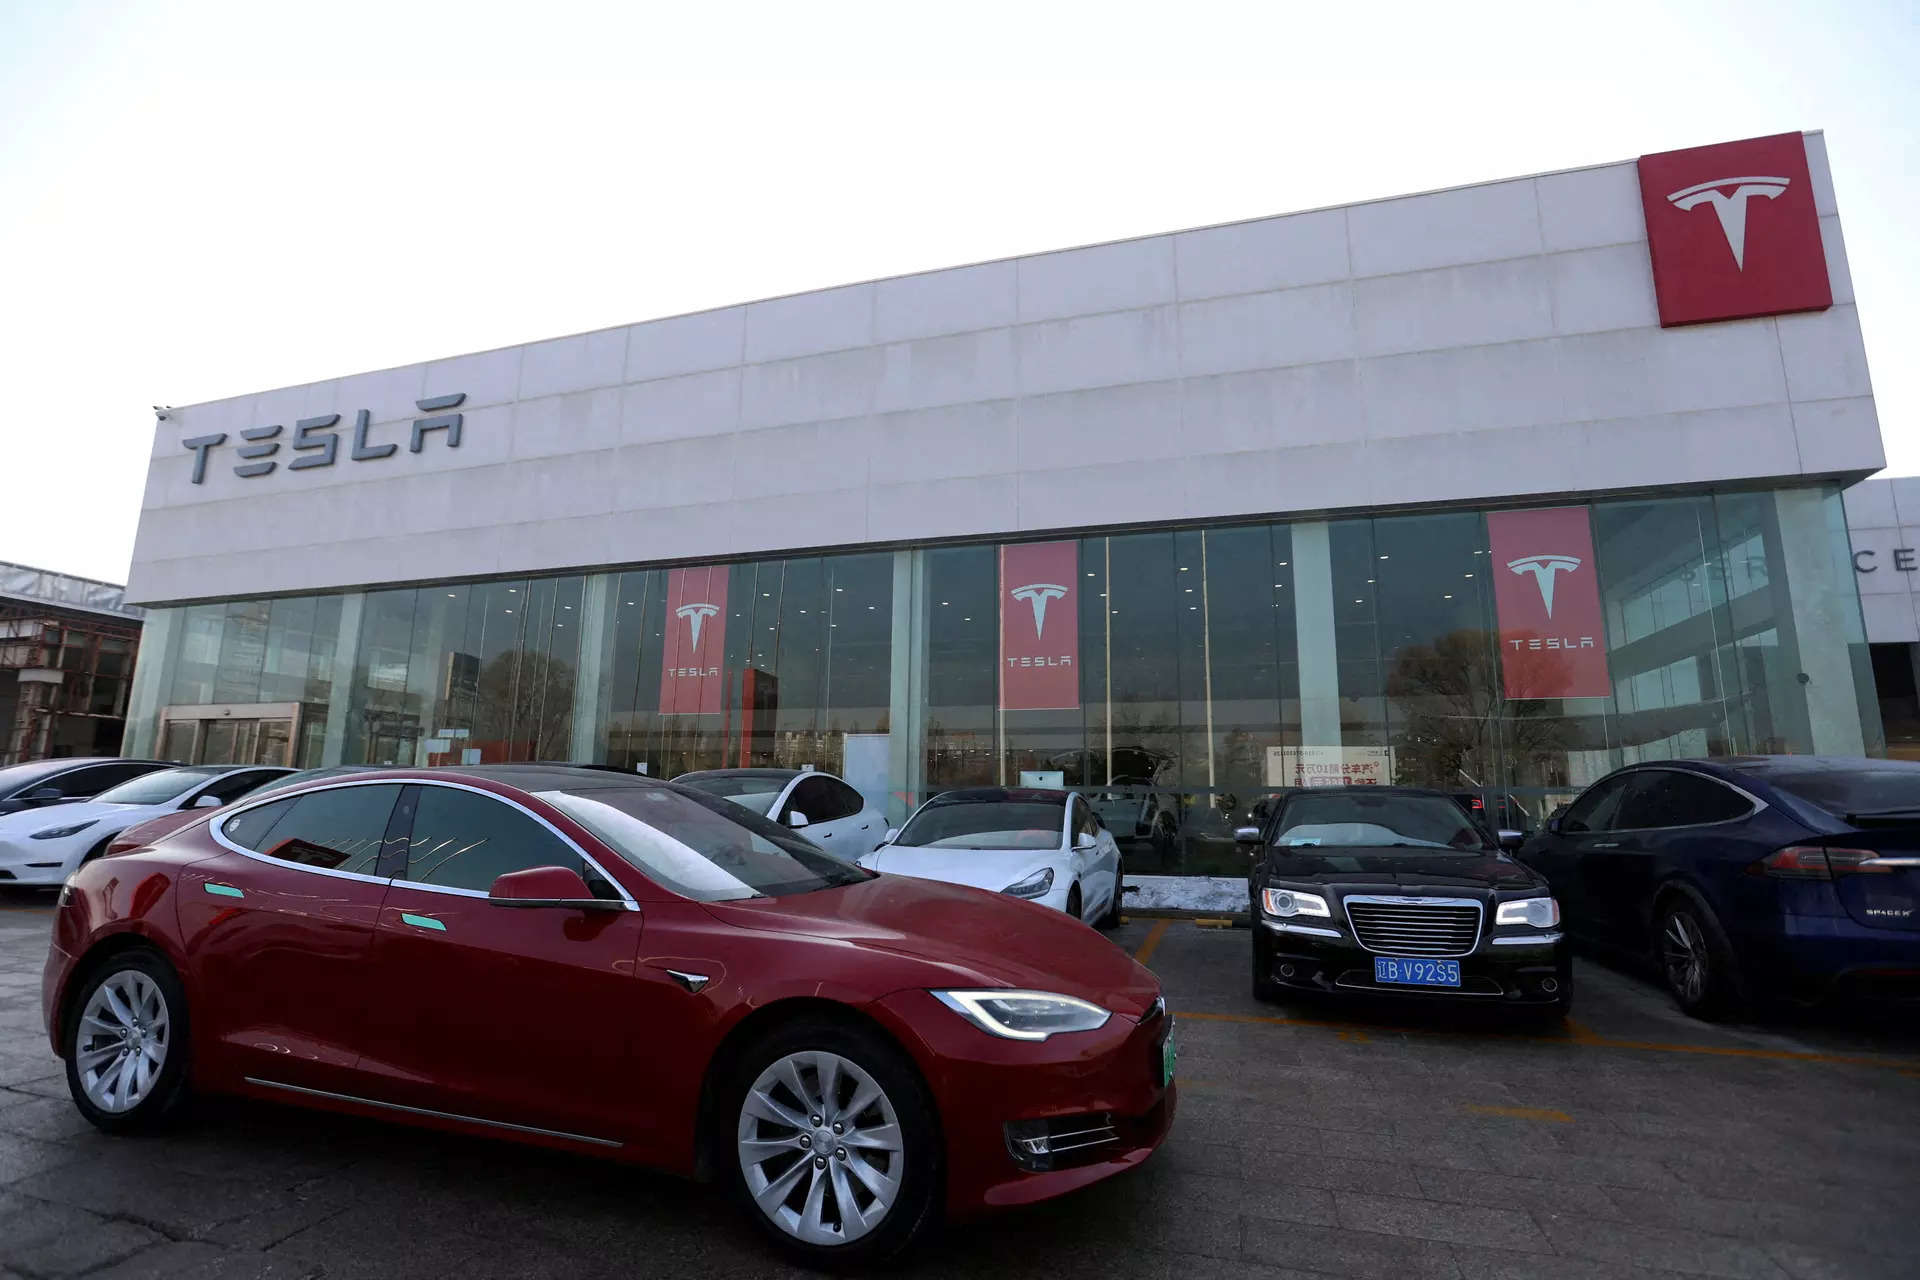 <p>Tesla sold 60,365 China-made vehicles in Feb, down 19% from a year earlier and the lowest volume since Dec'22, according to data from the China Passenger Car Association.</p>